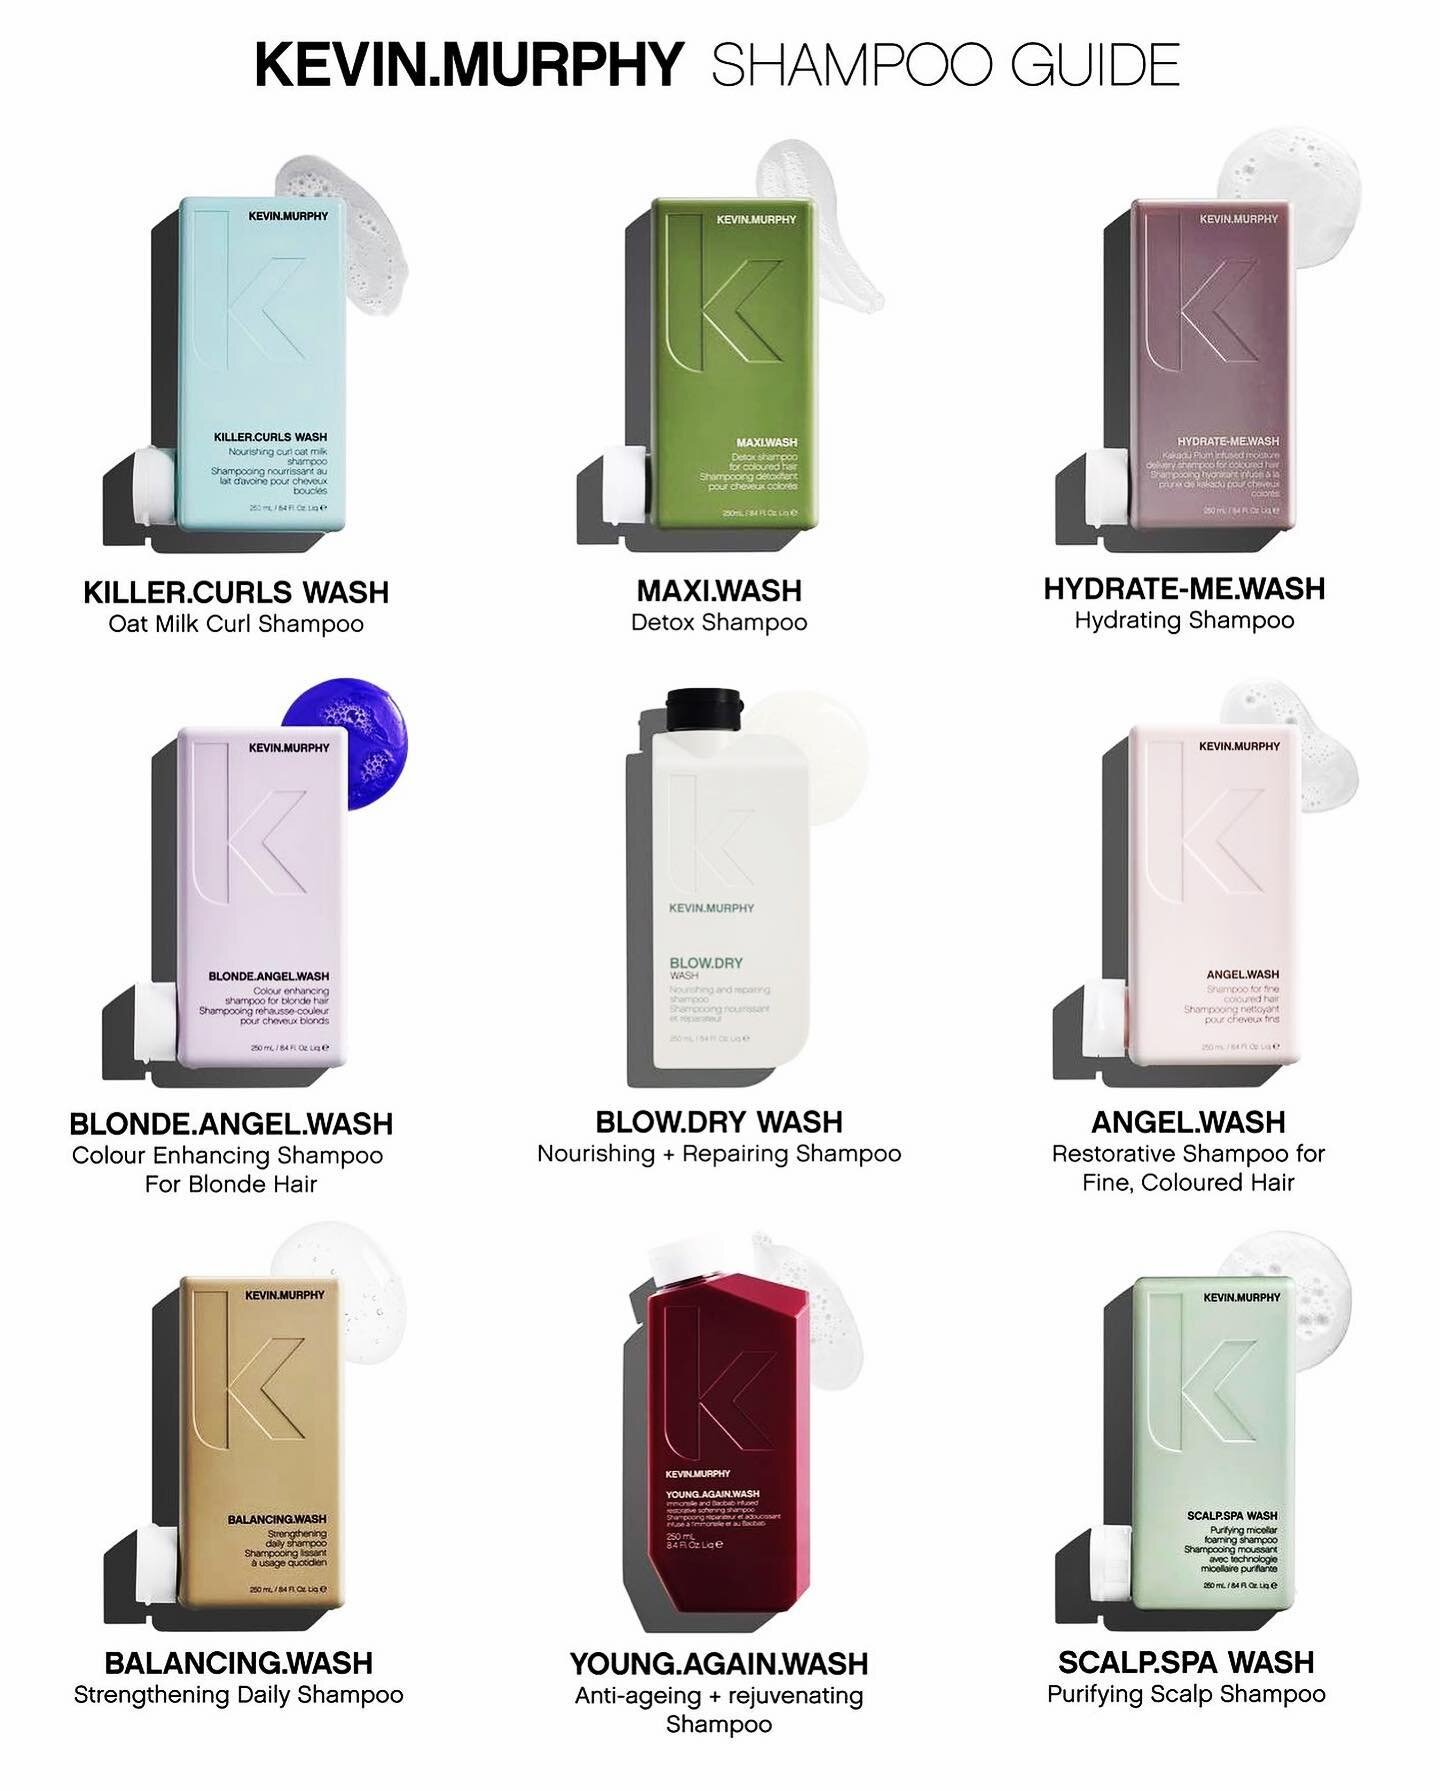 Make wash day feel rich and luxurious using our Shampoo Guide
Featuring NEW KILLER.CURLS WASH

Which WASH is right for you?

DM for ❔

#summerhair #hair #kevinmurphy #kevinmurphyproducts #jax